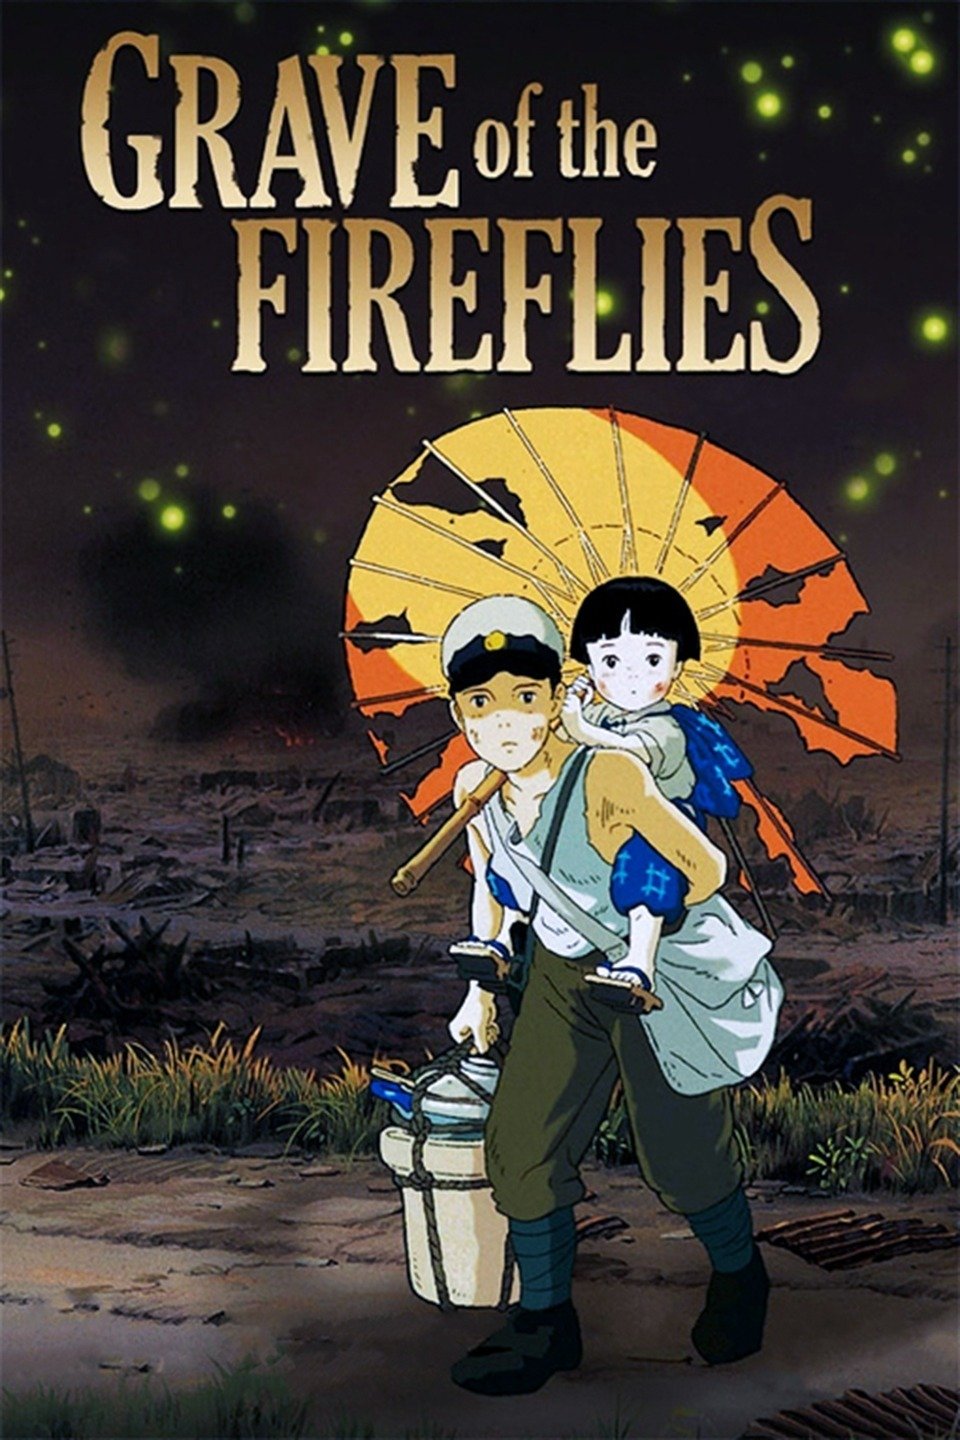 Number 5 - Grave of the Fireflies